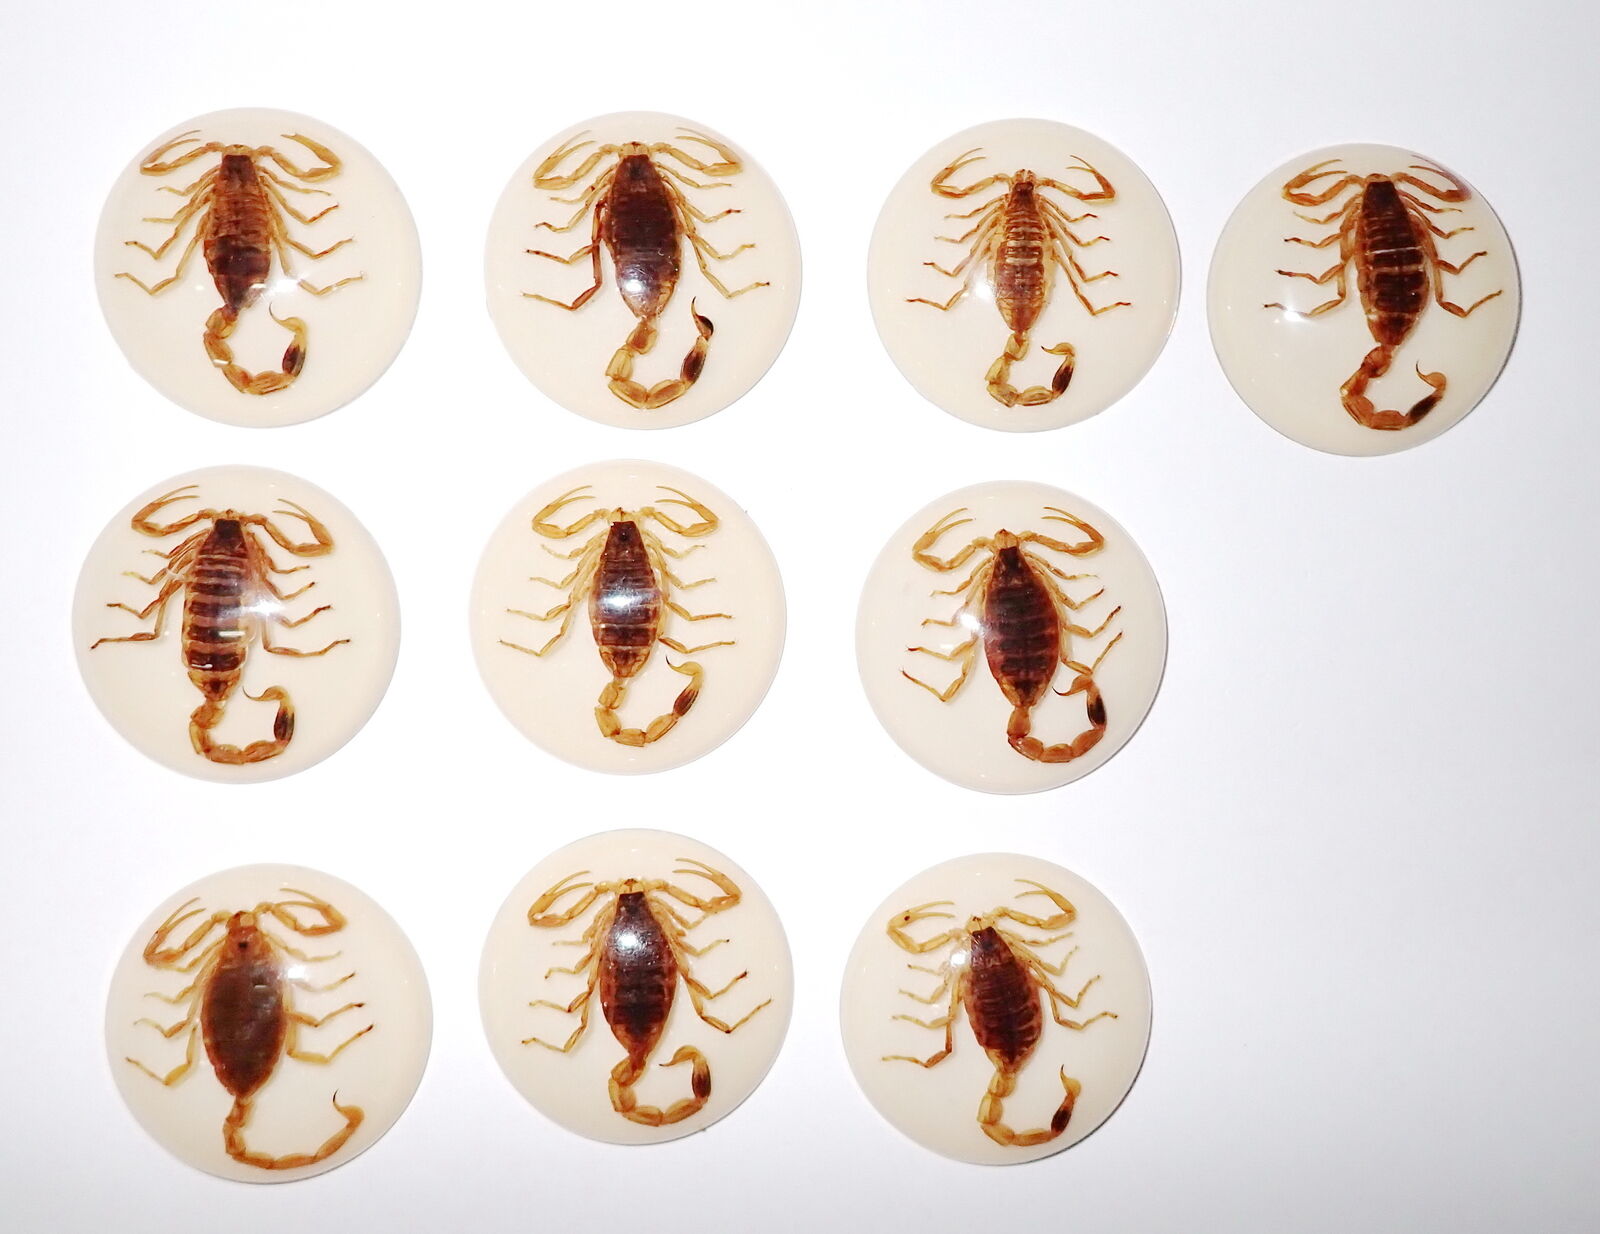 Insect Cabochon Golden Scorpion Specimen 35 mm Round on White 10 piece Lot